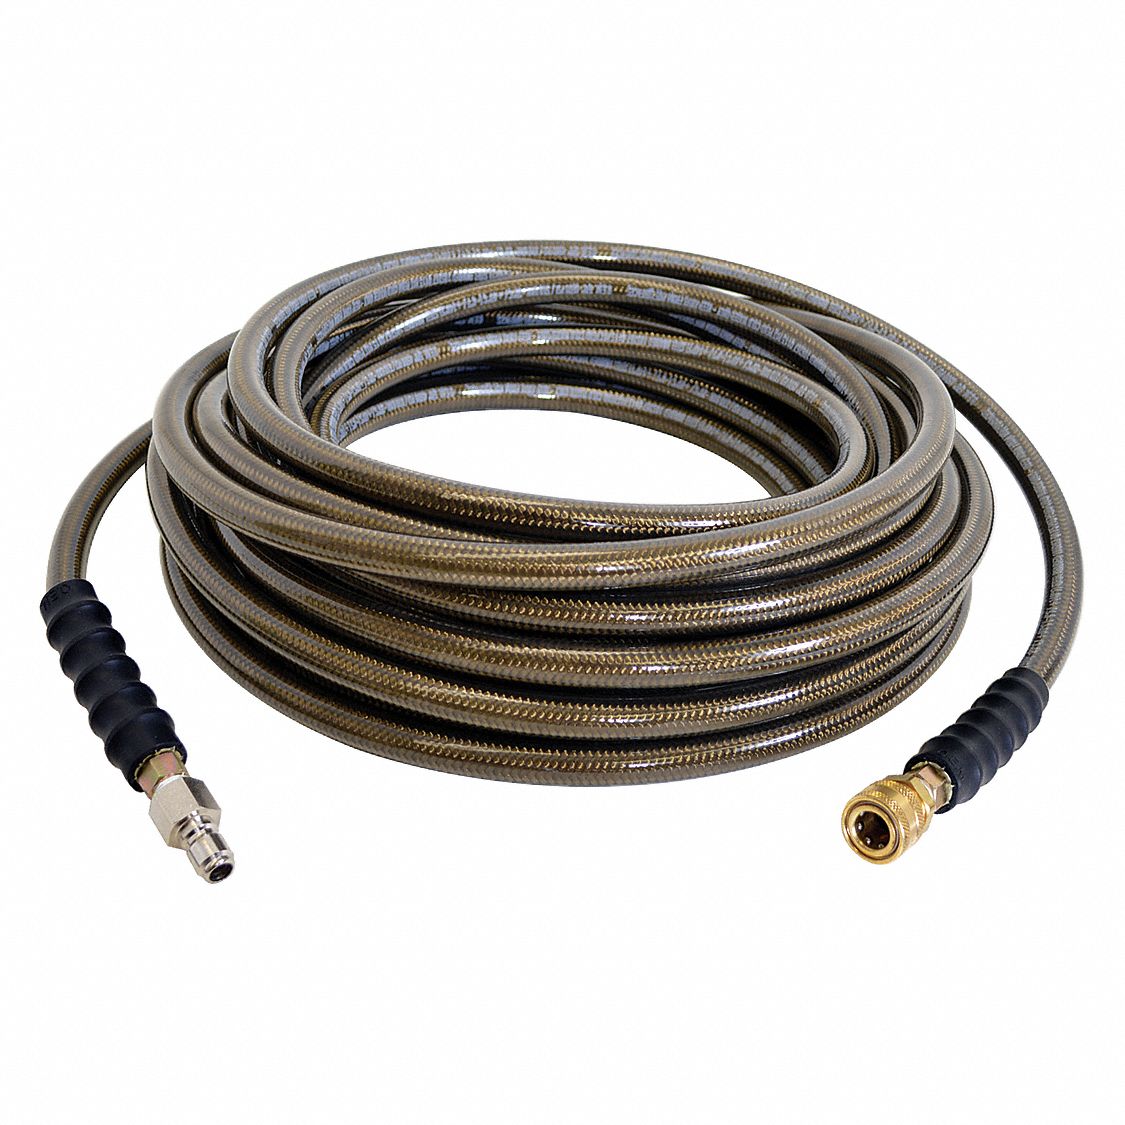 25 FT High Pressure Washer Hose Replacement 3000PSI w/ M22 Threaded Connectors 